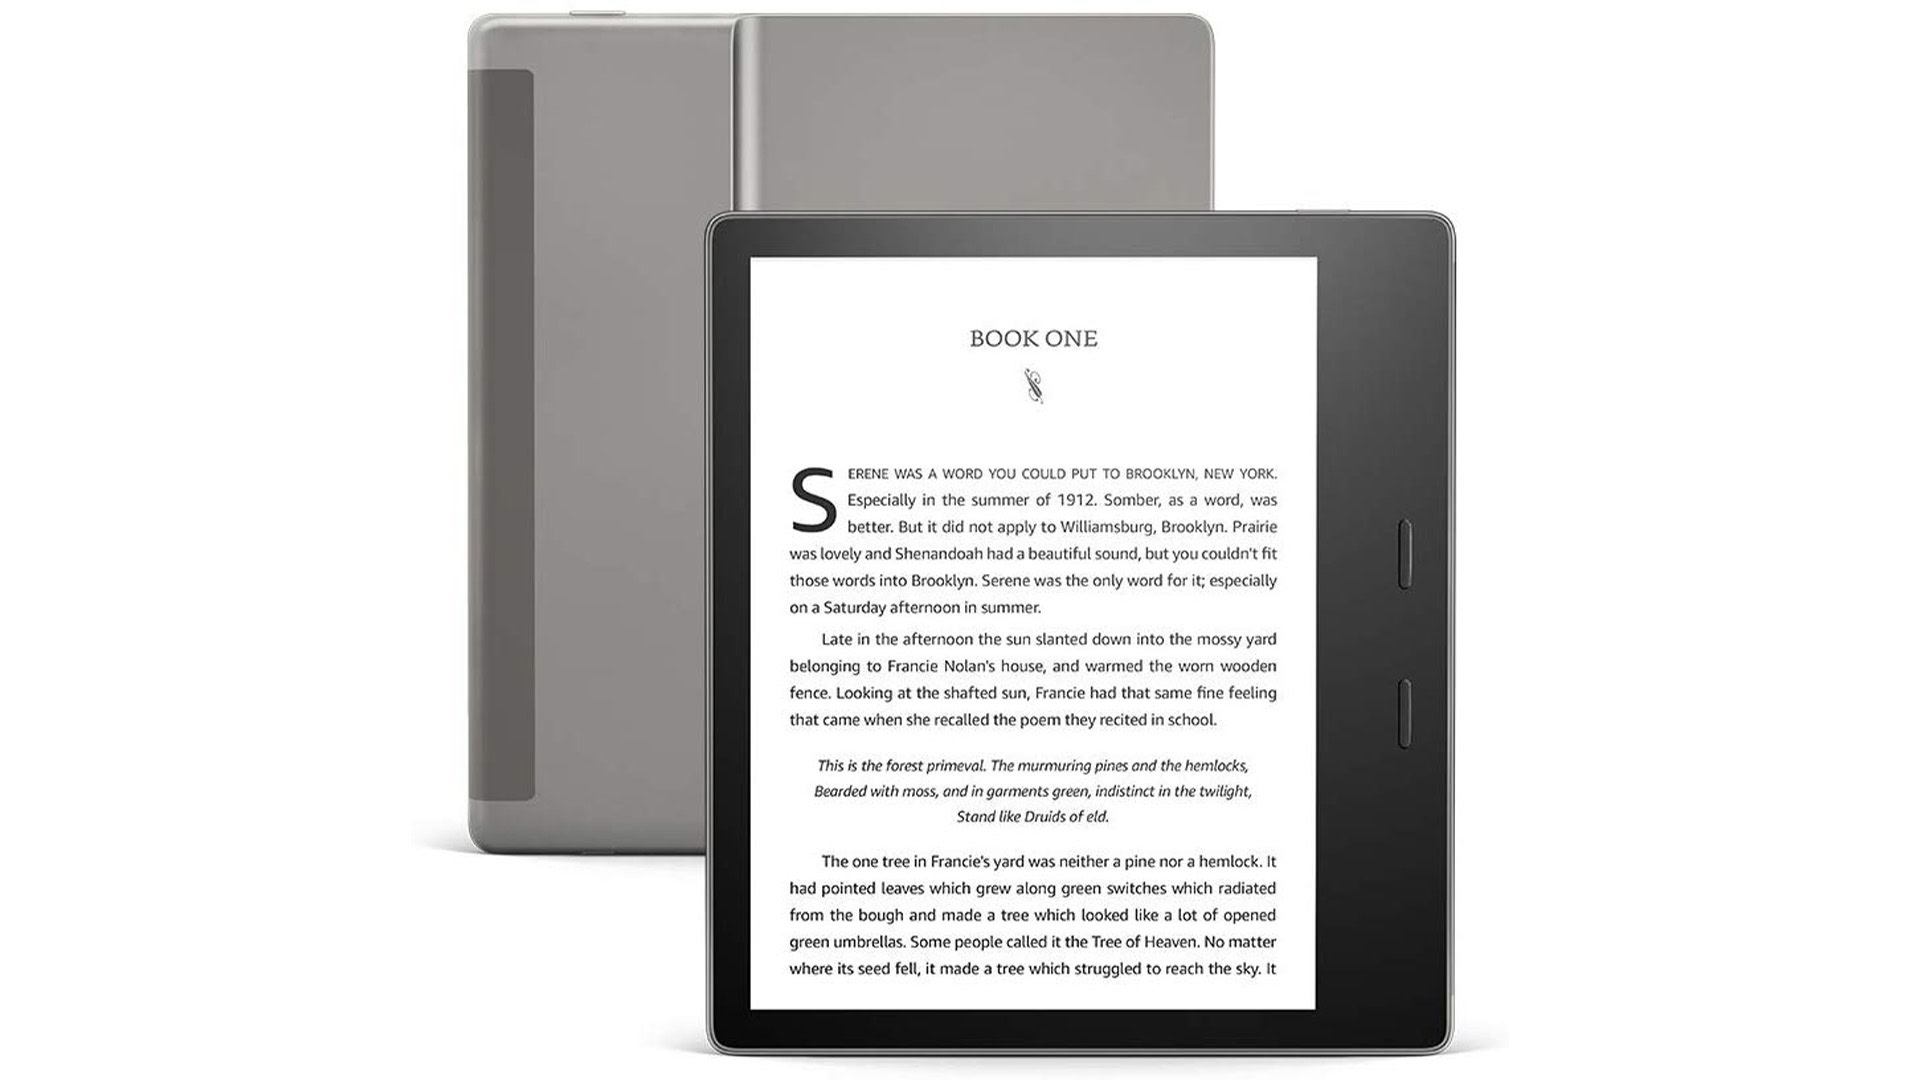 Kindle Paperwhite in the new color “Plum”! What do you think? : r/kindle